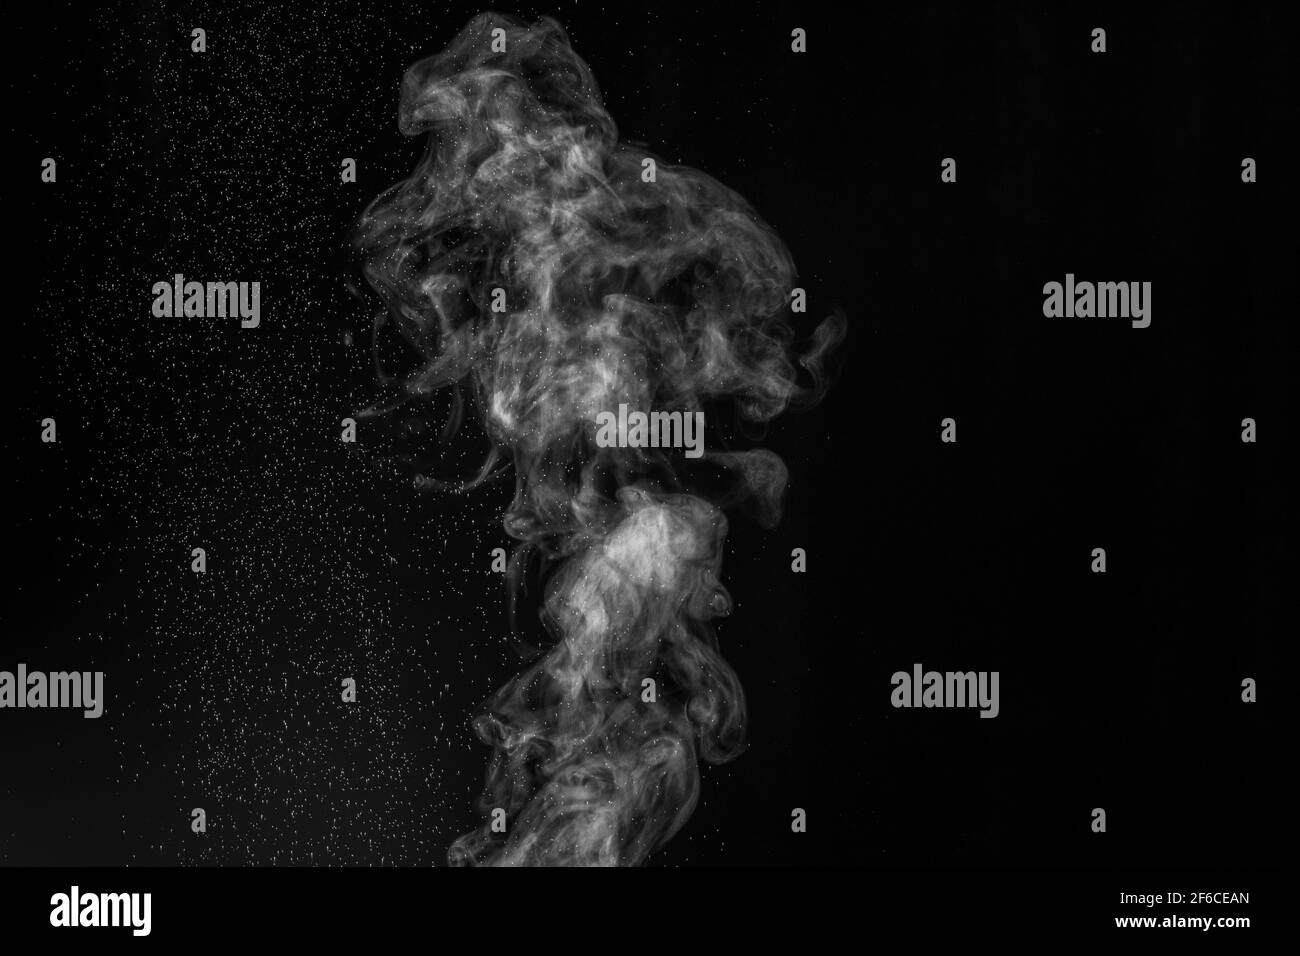 Curly white steam rising up and splashing water scattering in different directions isolated on a black background. Evaporation of liquid and condensat Stock Photo